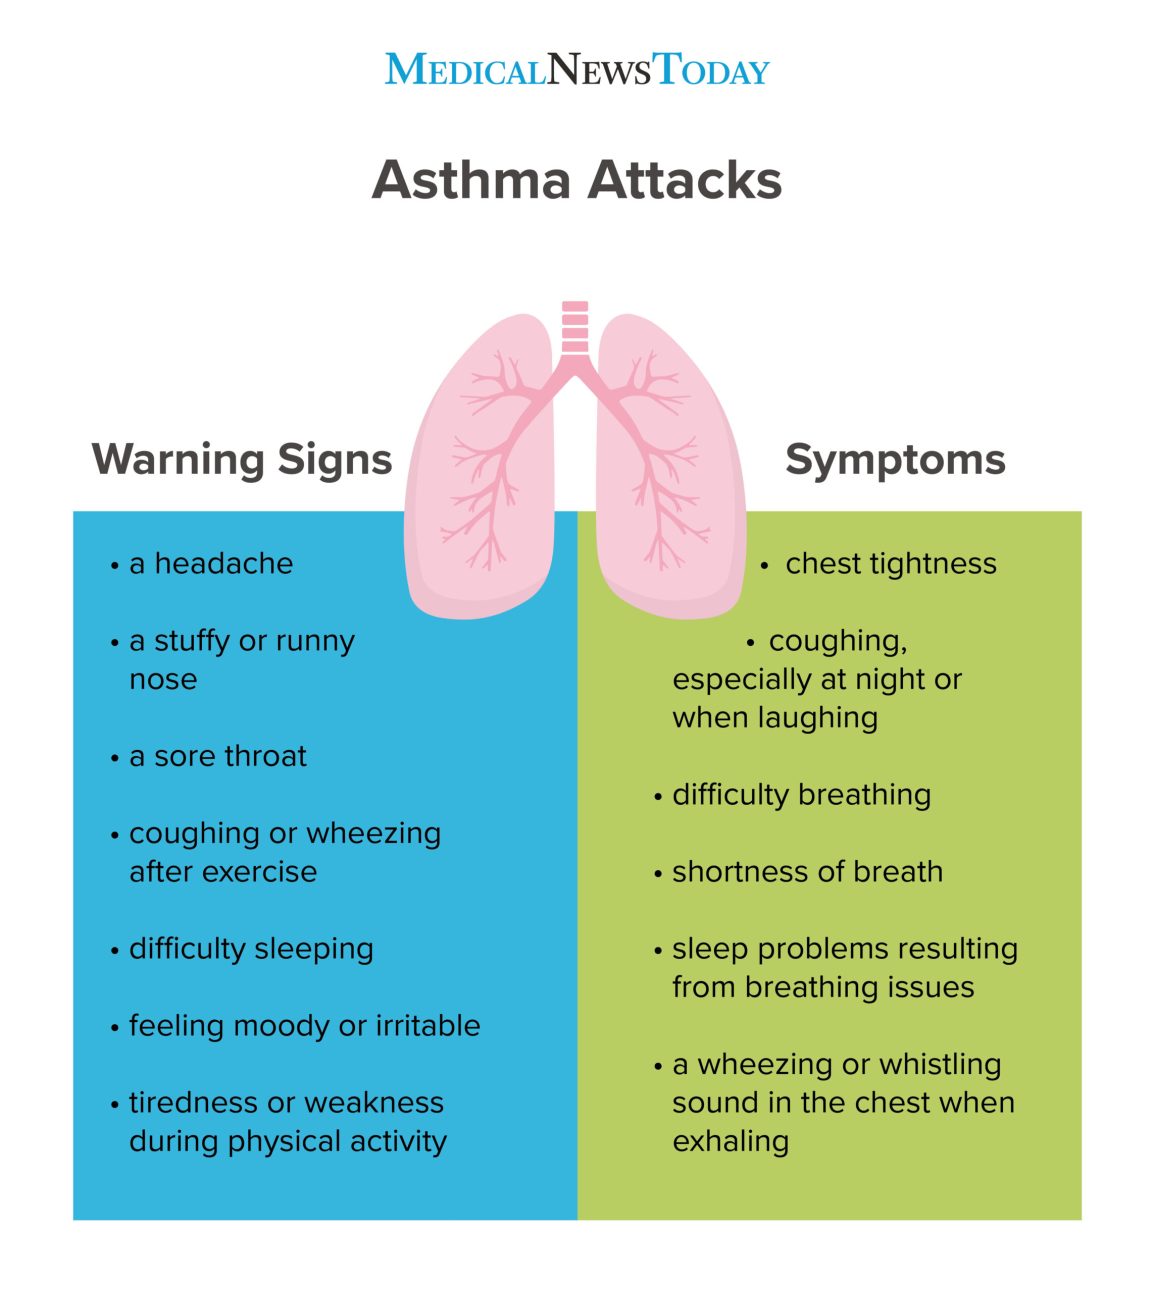 issdesignscolor: Can Normal Doctors Diagnose Asthma